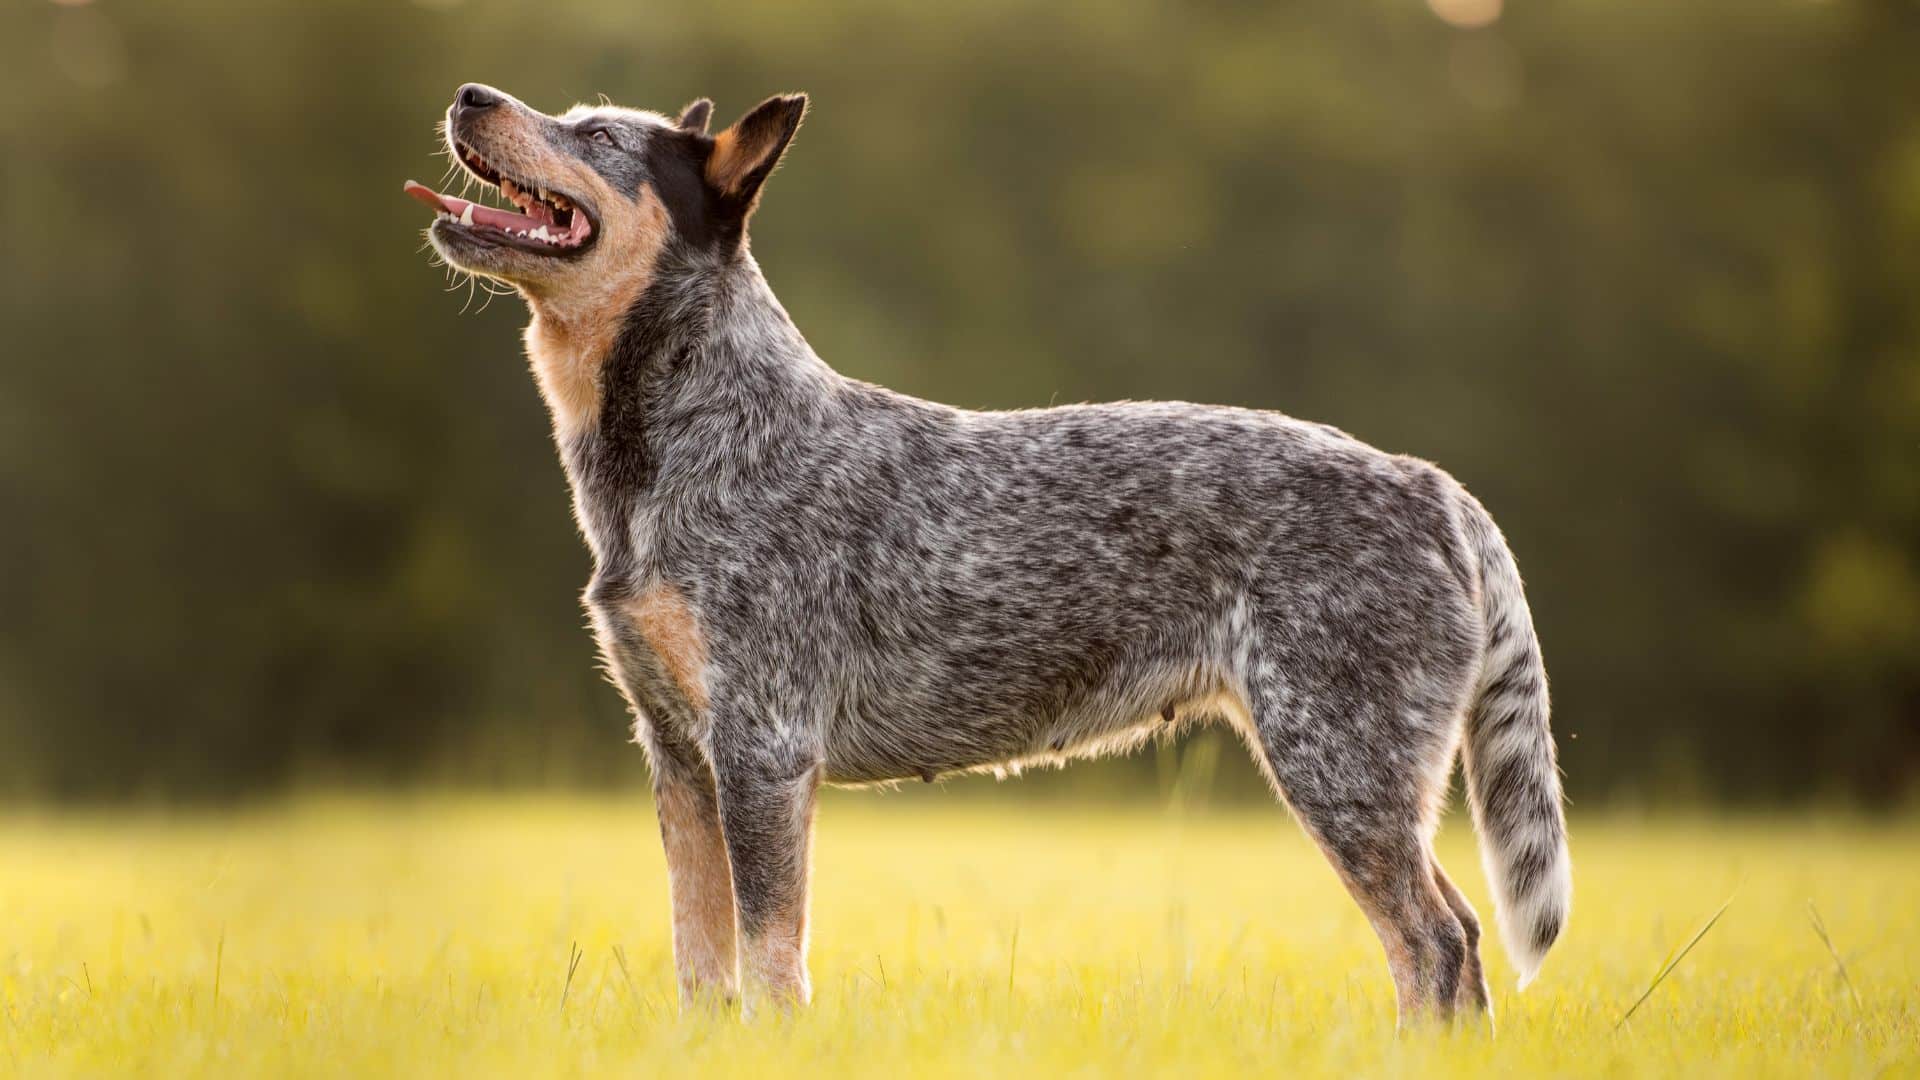 Blue heelers consistent training session and basic commands